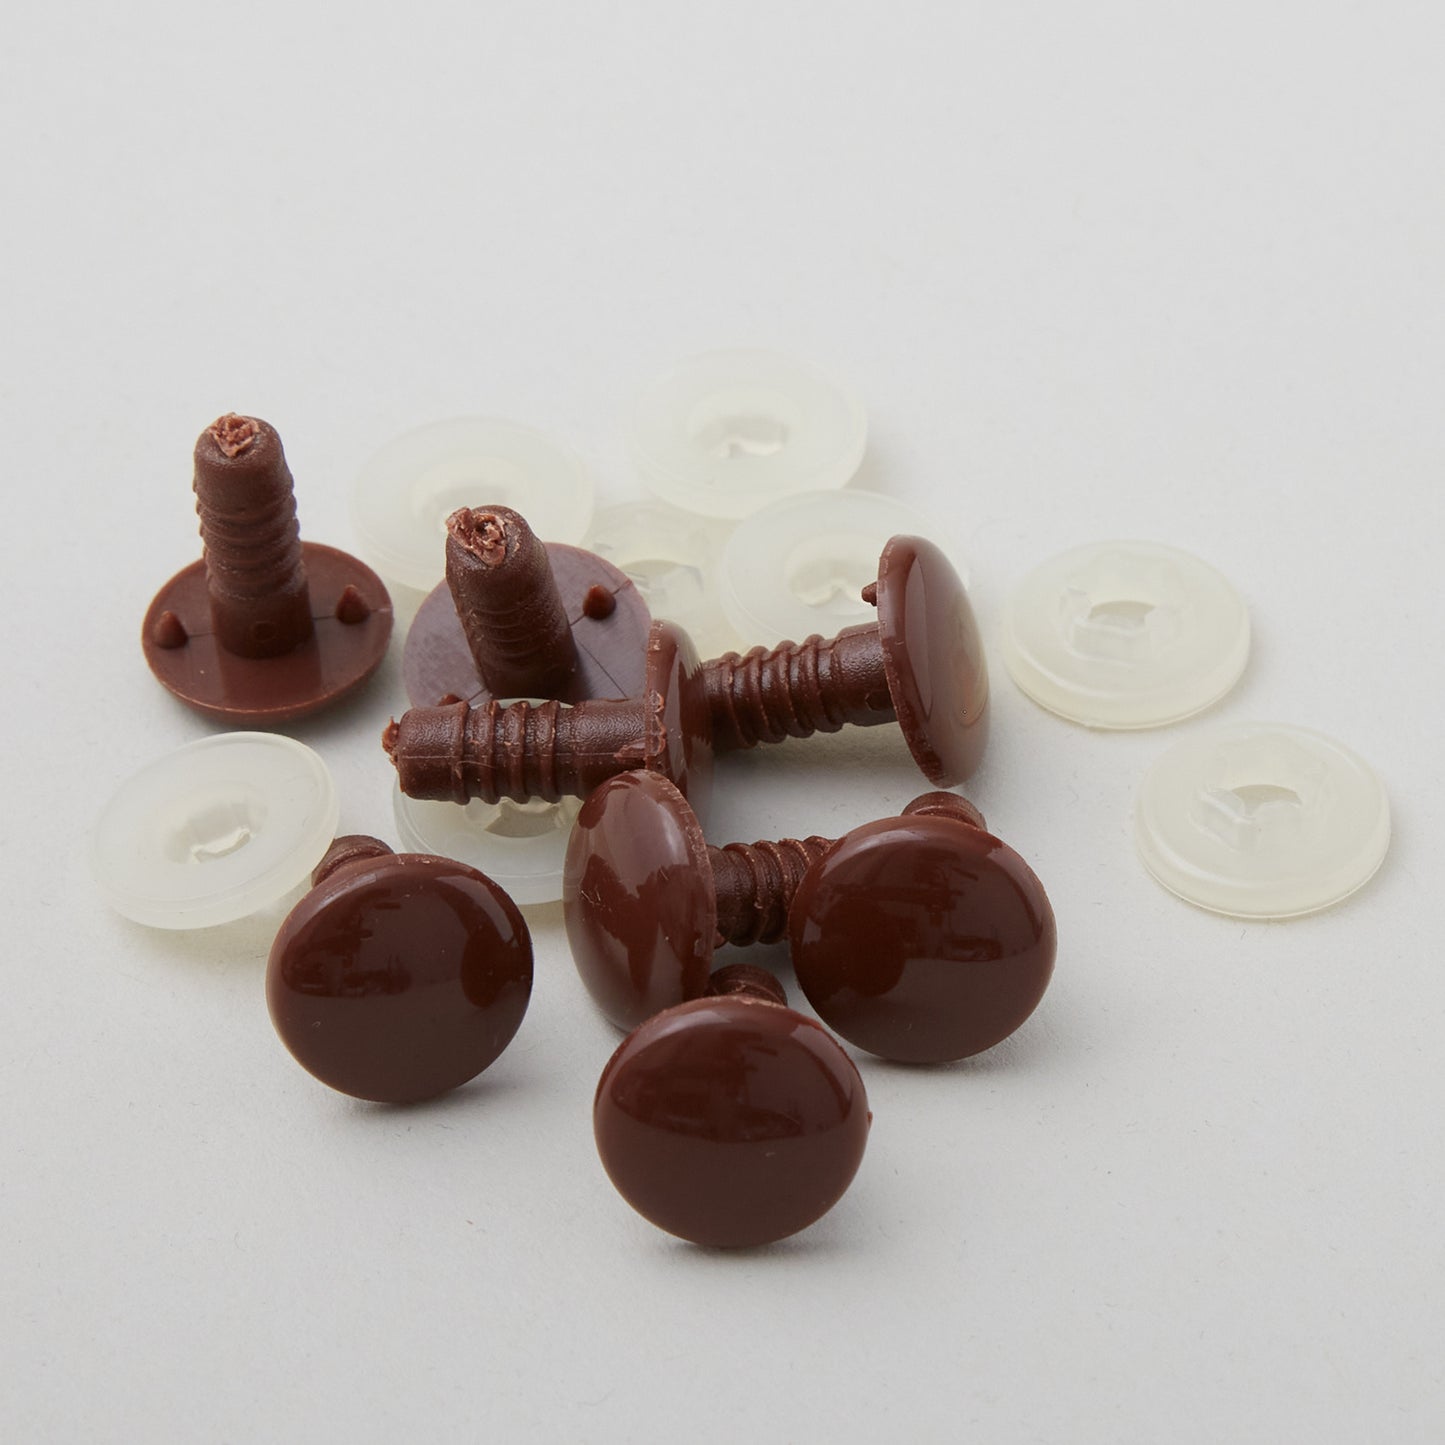 Plastic Button Safety Eyes - 15mm Brown - 4 Pairs Alternative View #1